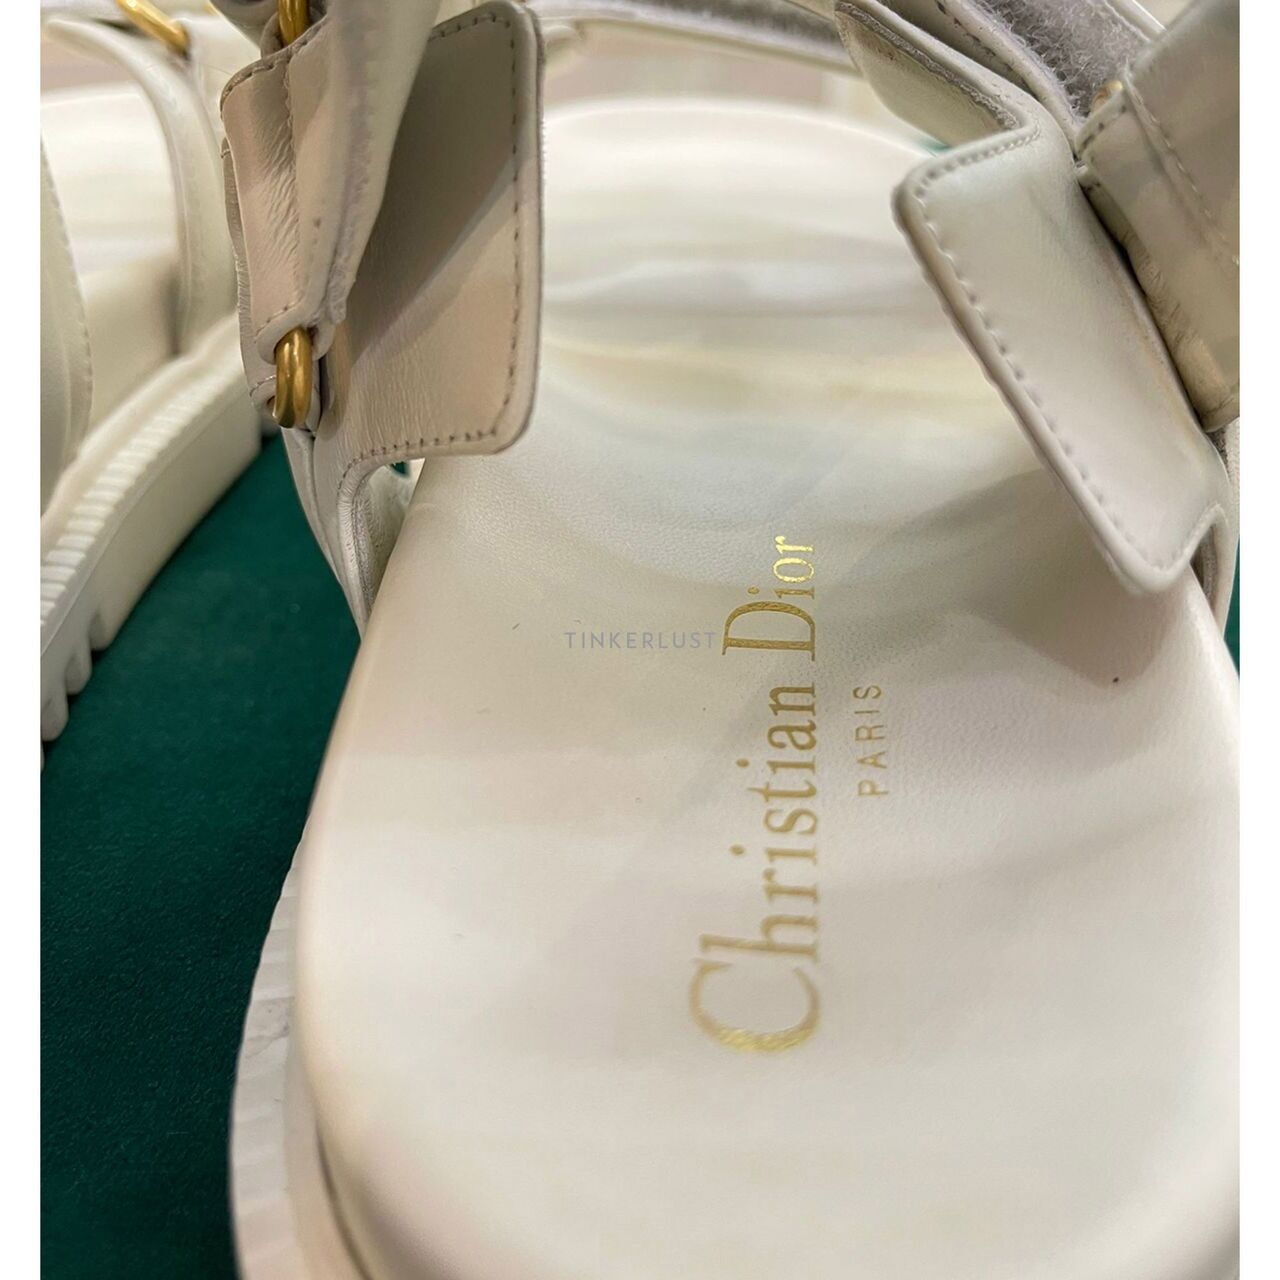 Christian Dior Dioract Ivory GHW 2023 Sandals